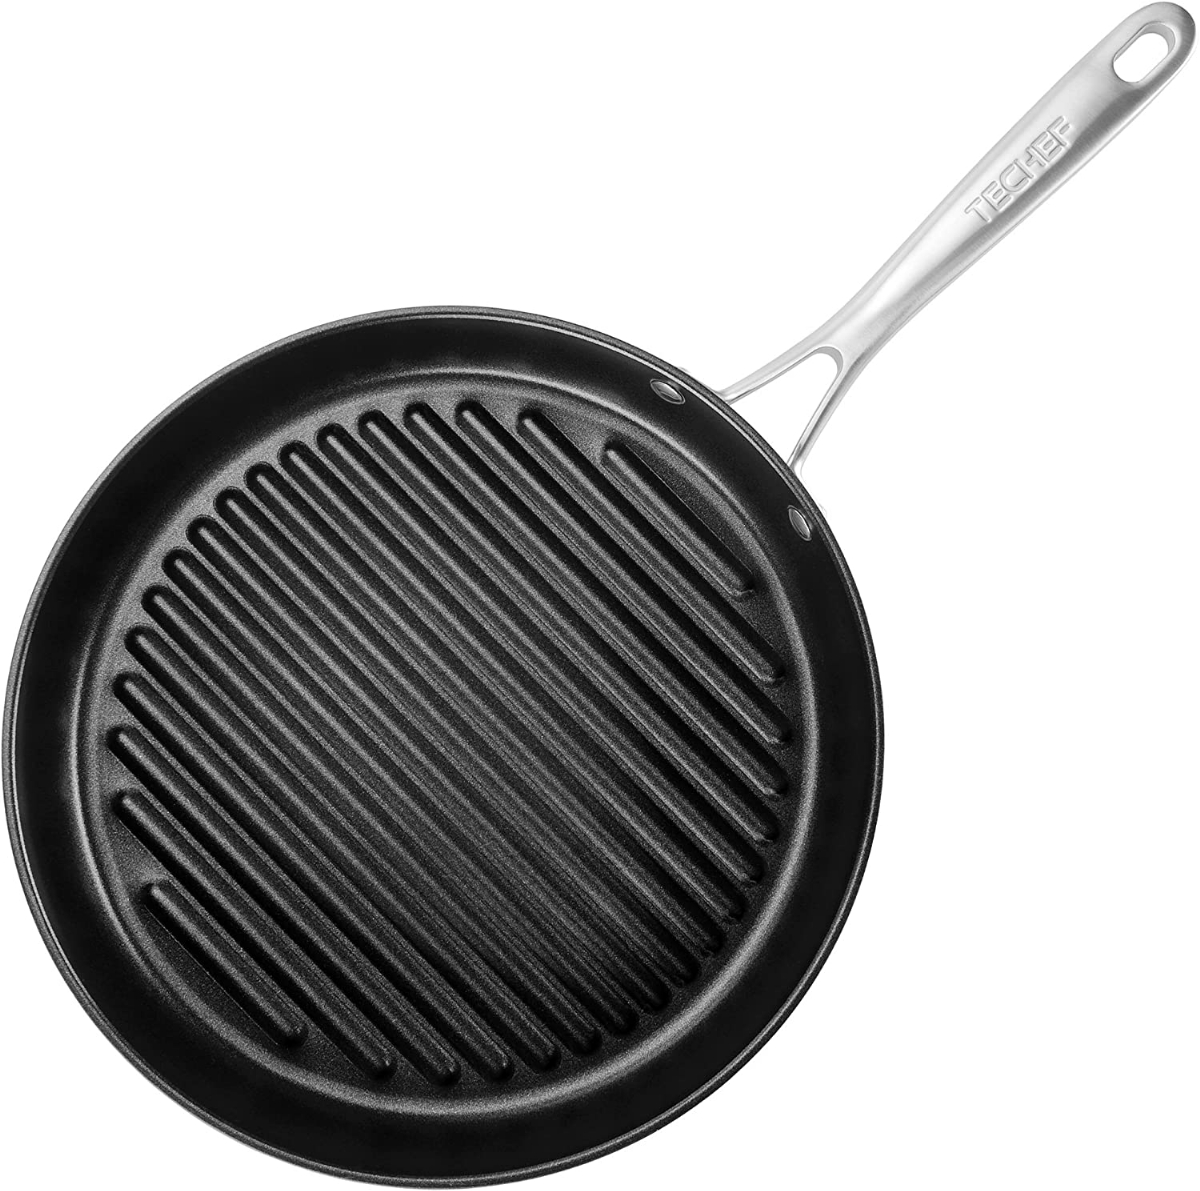 TECHEF - TRUE GRILL PAN - Stovetop Nonstick Indoor/Outdoor Smokeless BBQ  Grill Set, including a Grill Plate and Alumium Drip Tray